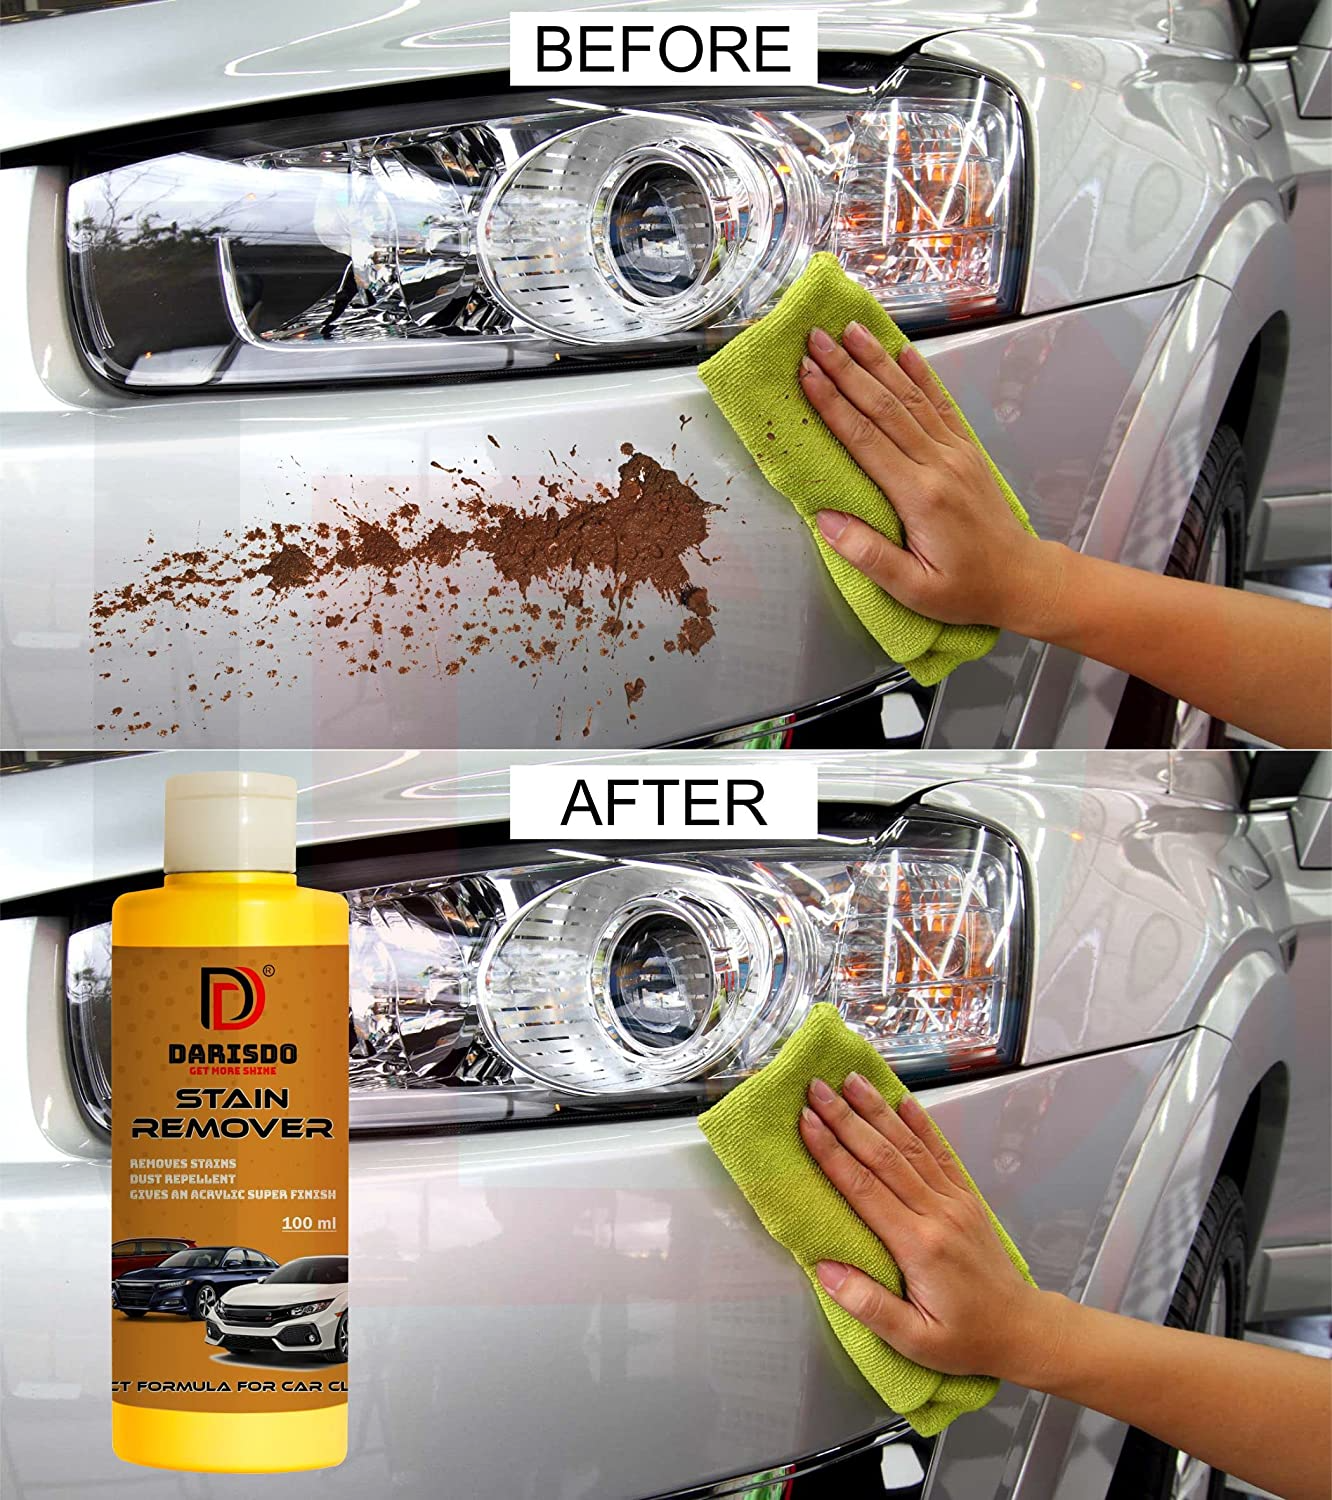 Darisdo Ultimate Car Scratch Remover - Polish & Paint Restorer - Easily Repair Paint Scratches, Water Spots Stain/Scratch Remover (100 ml)